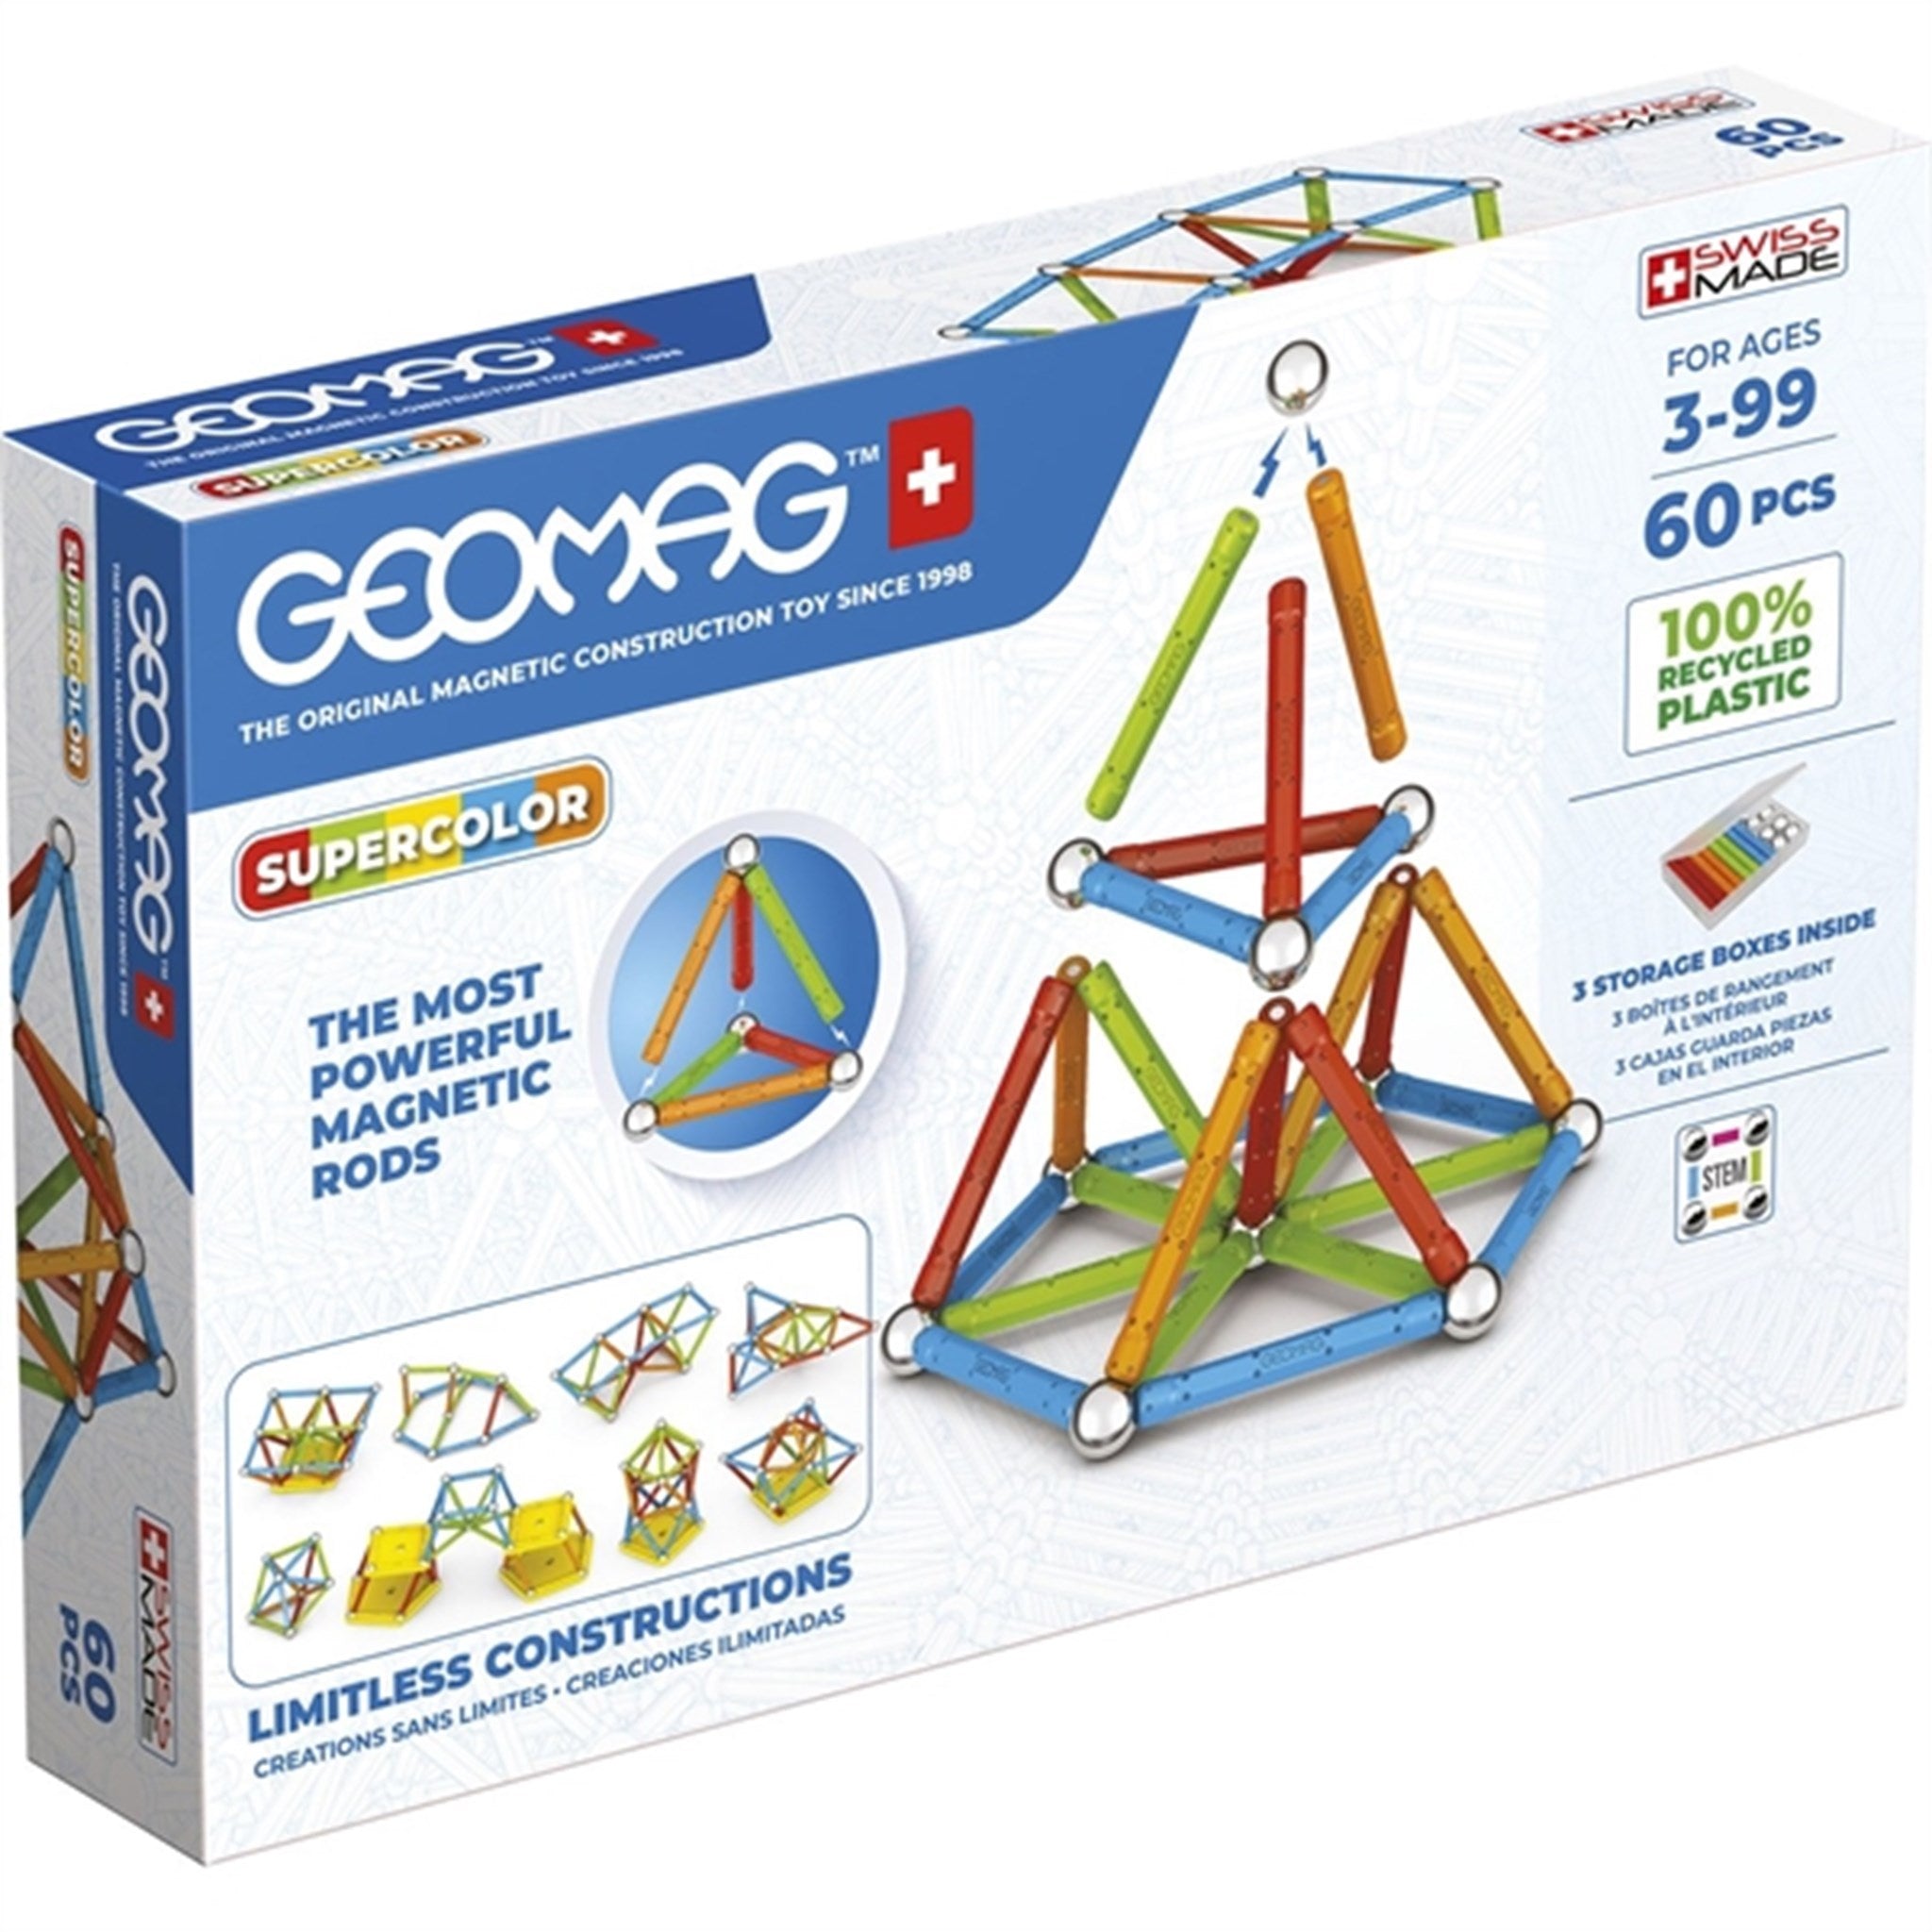 Geomag Supercolor Recycled 60 stk